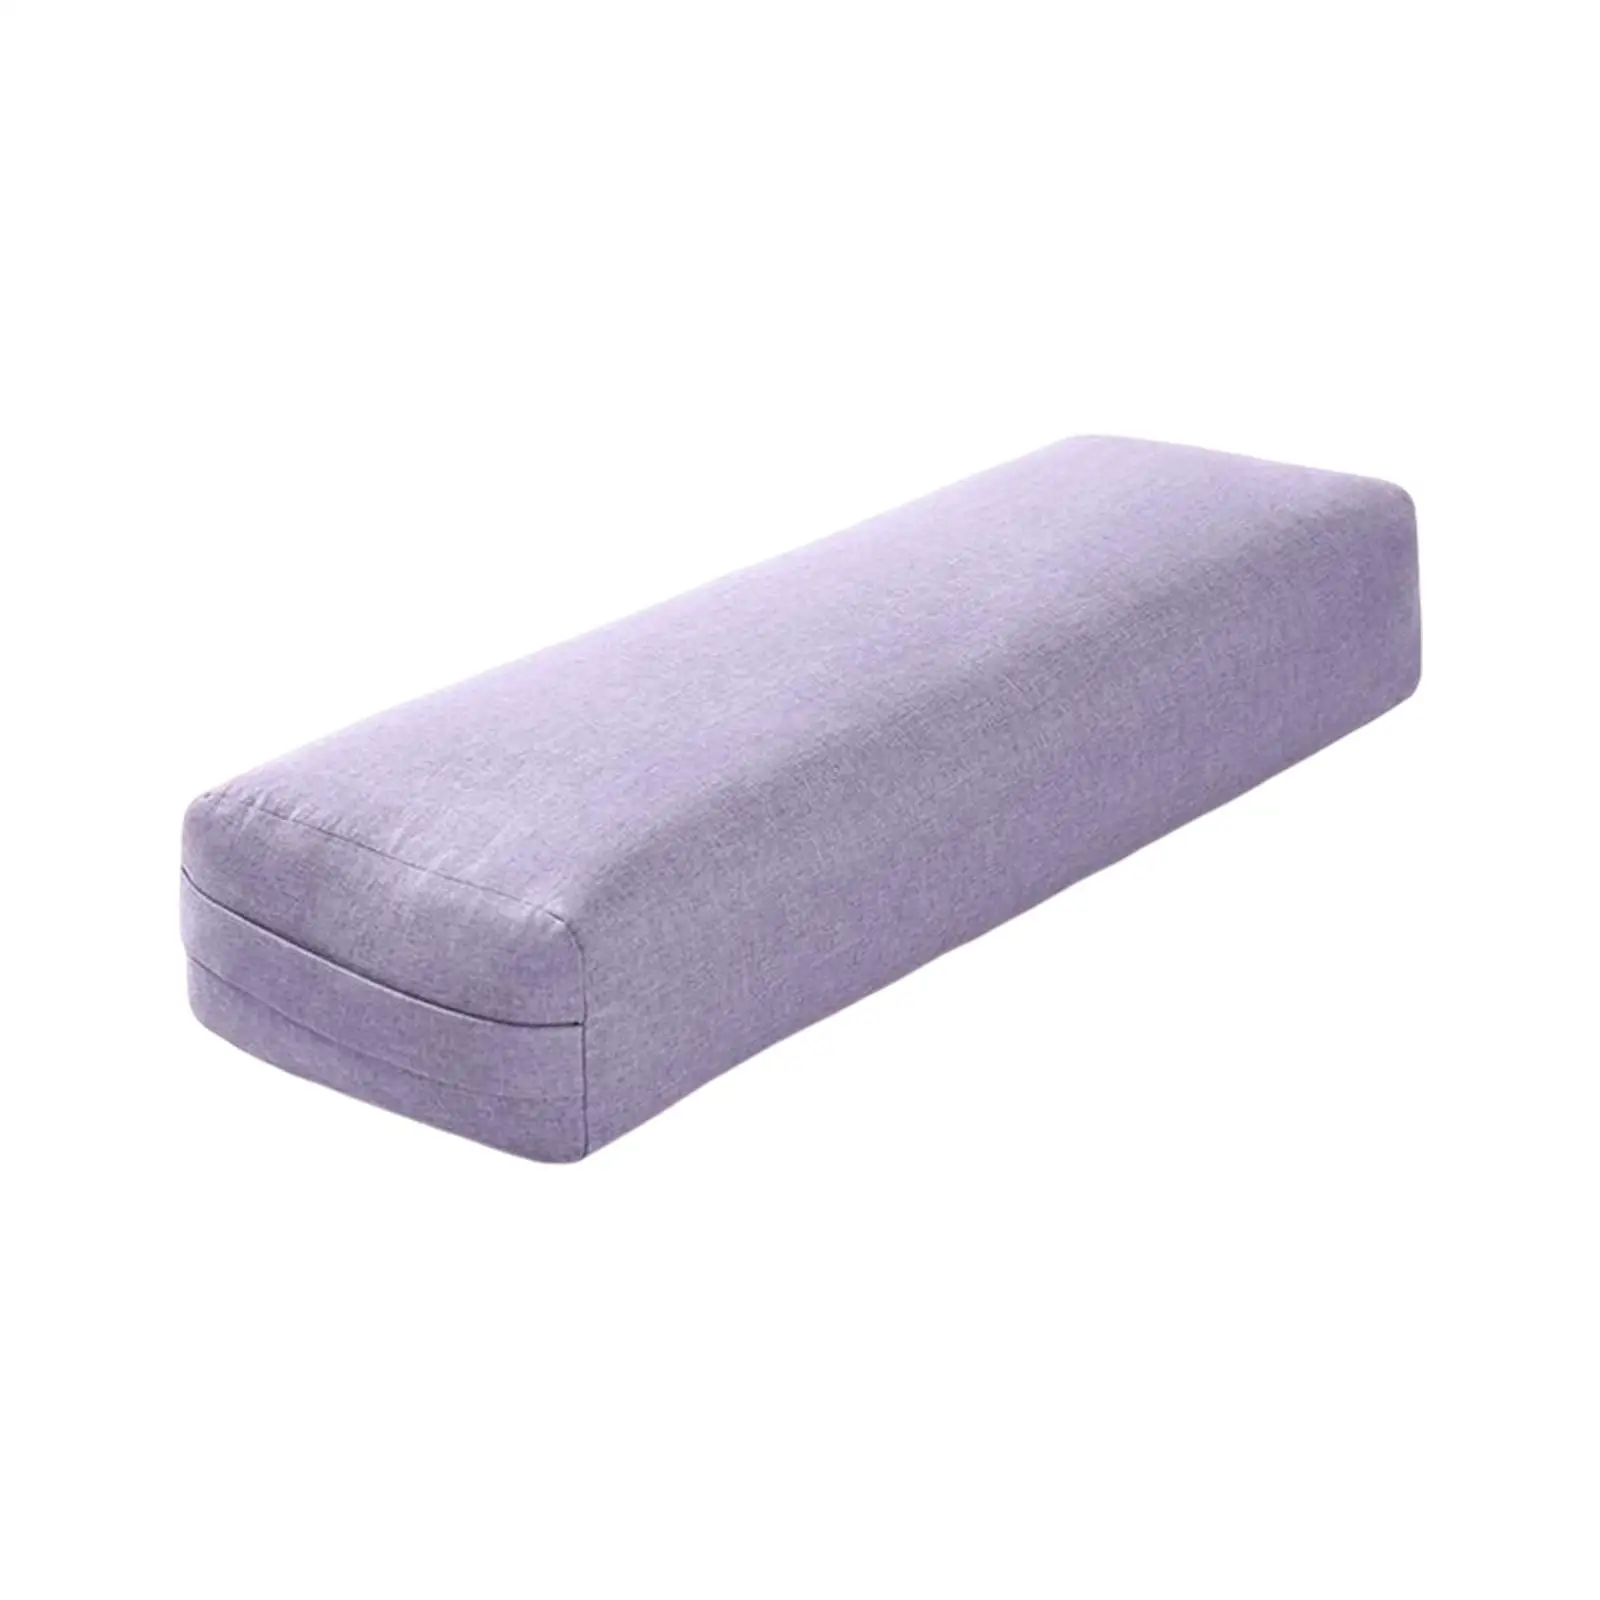 Yoga bolster, removable, washable cover, yoga pillow for relaxing